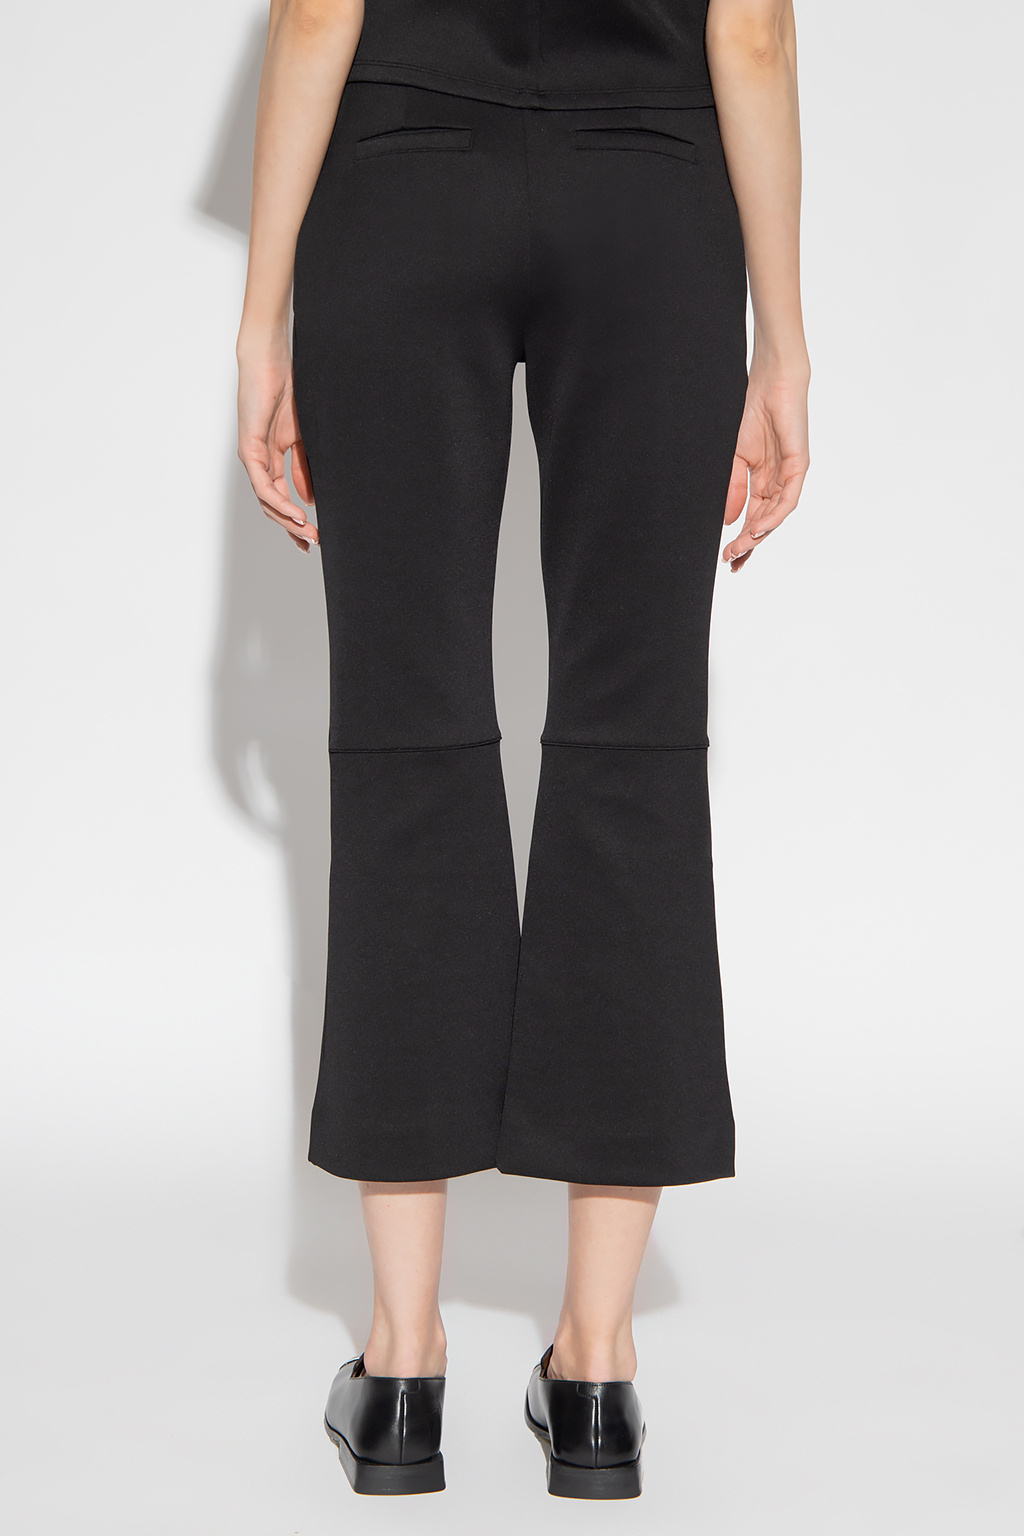 Proenza Schouler White Label Flared trousers